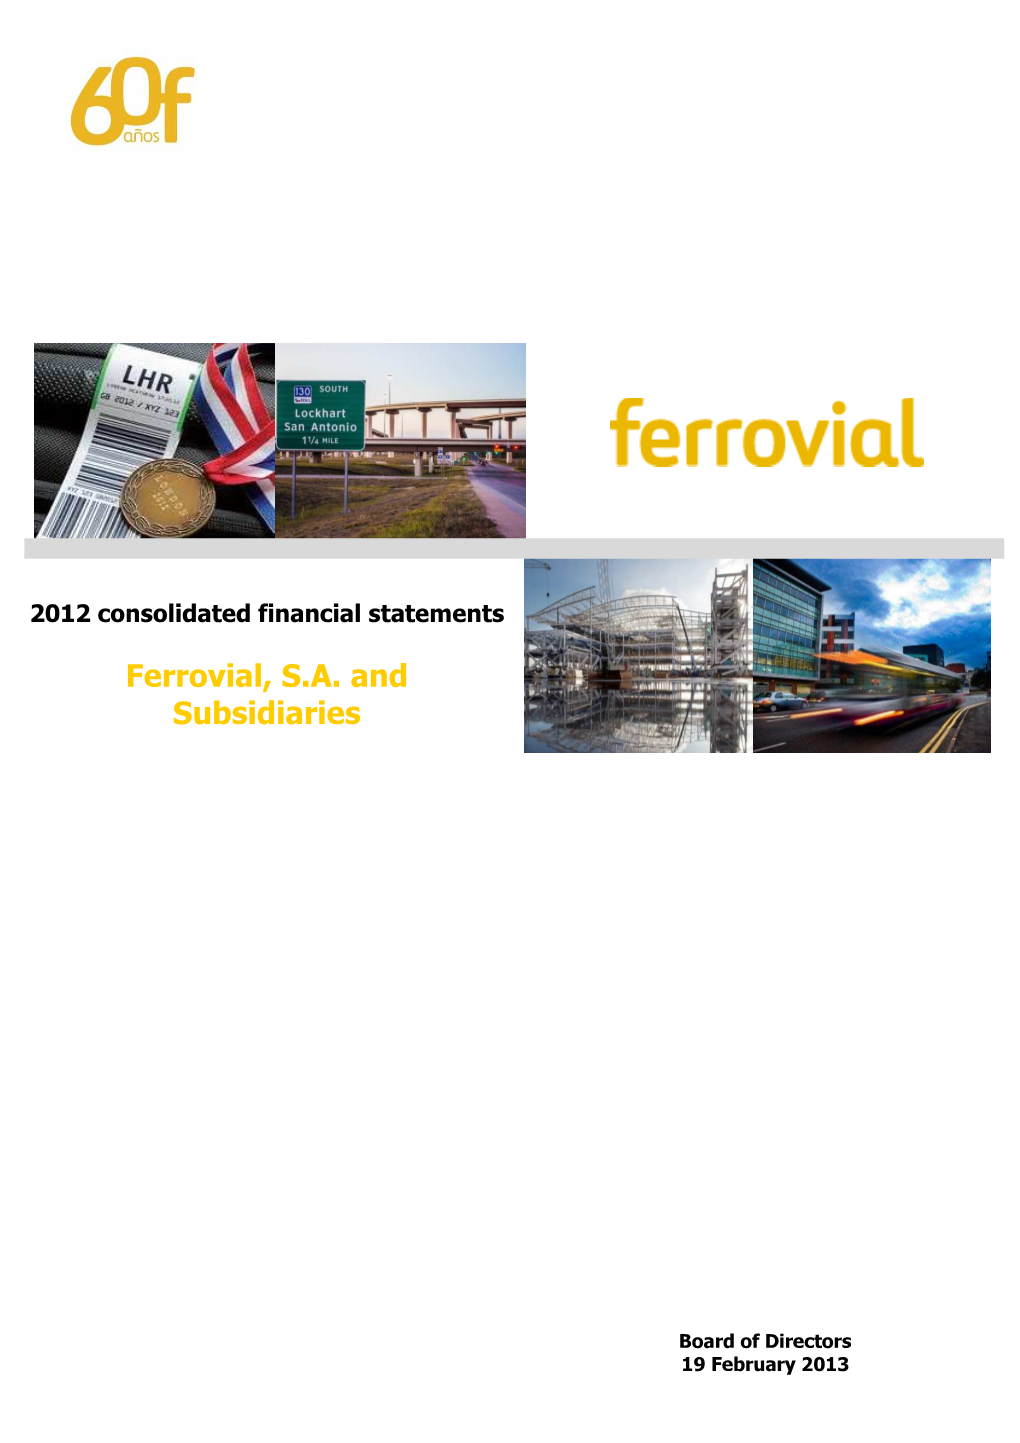 Ferrovial, S.A. and Subsidiaries